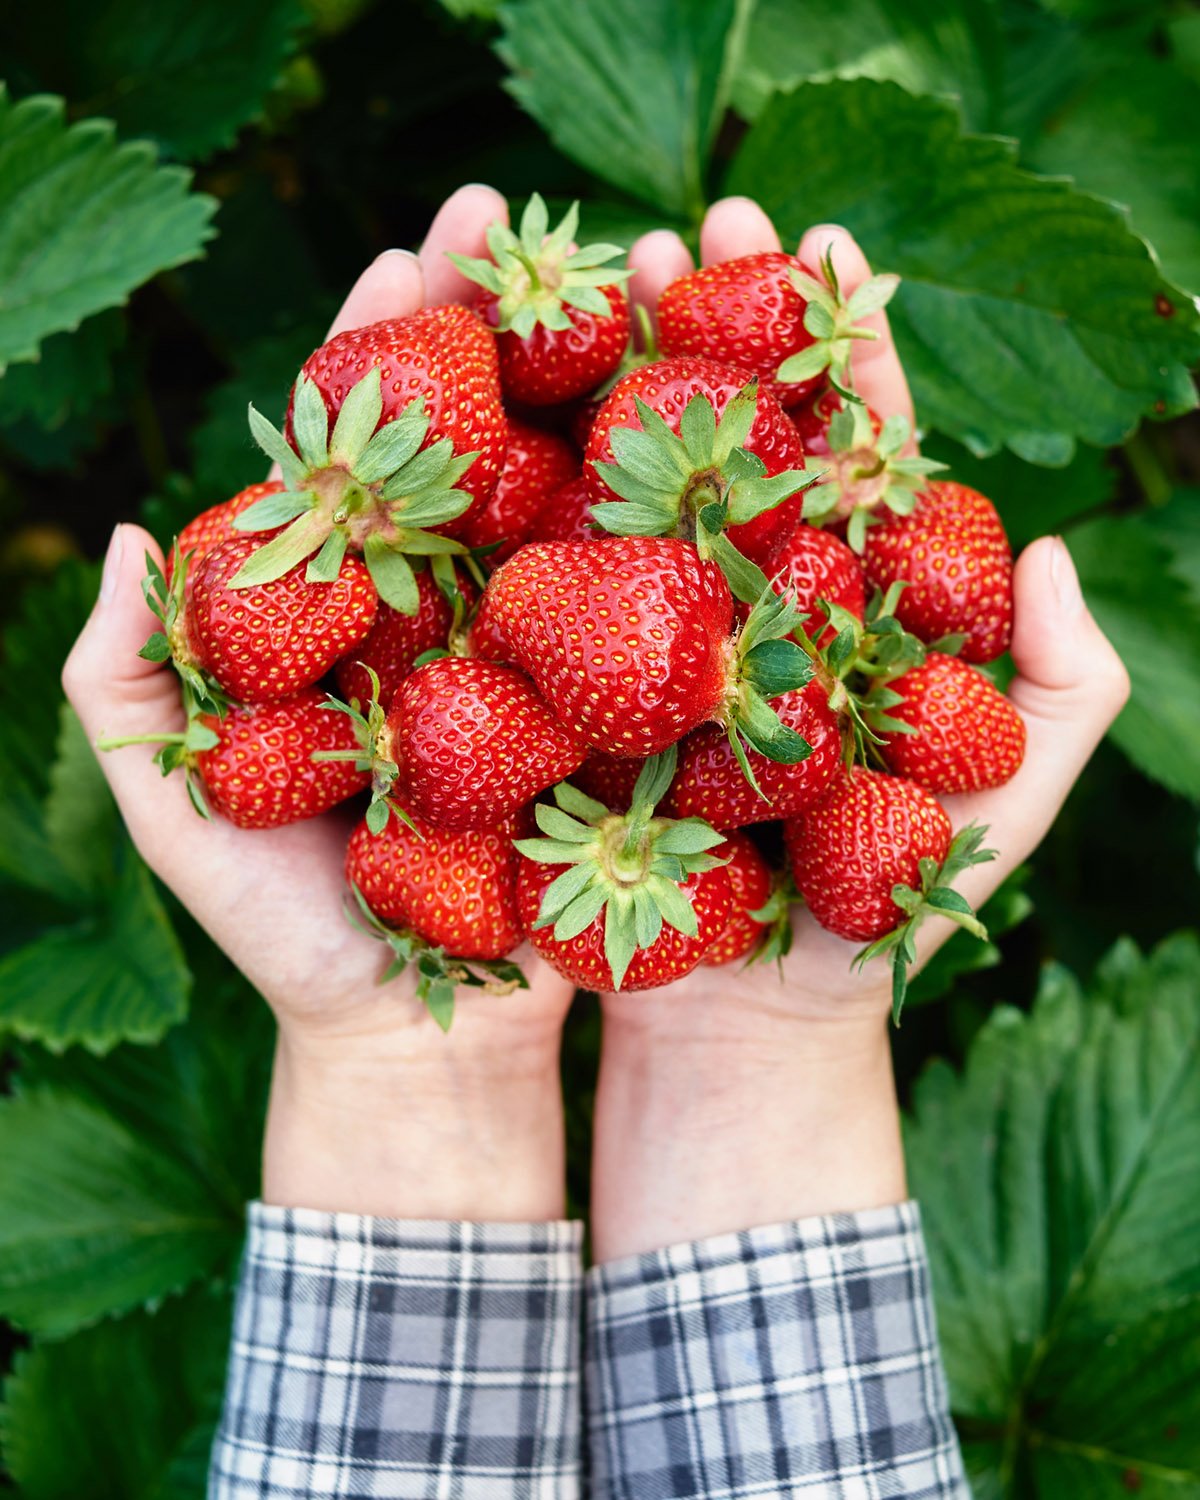 Closeup of woman's hands holding freshly picked strawberries in garden